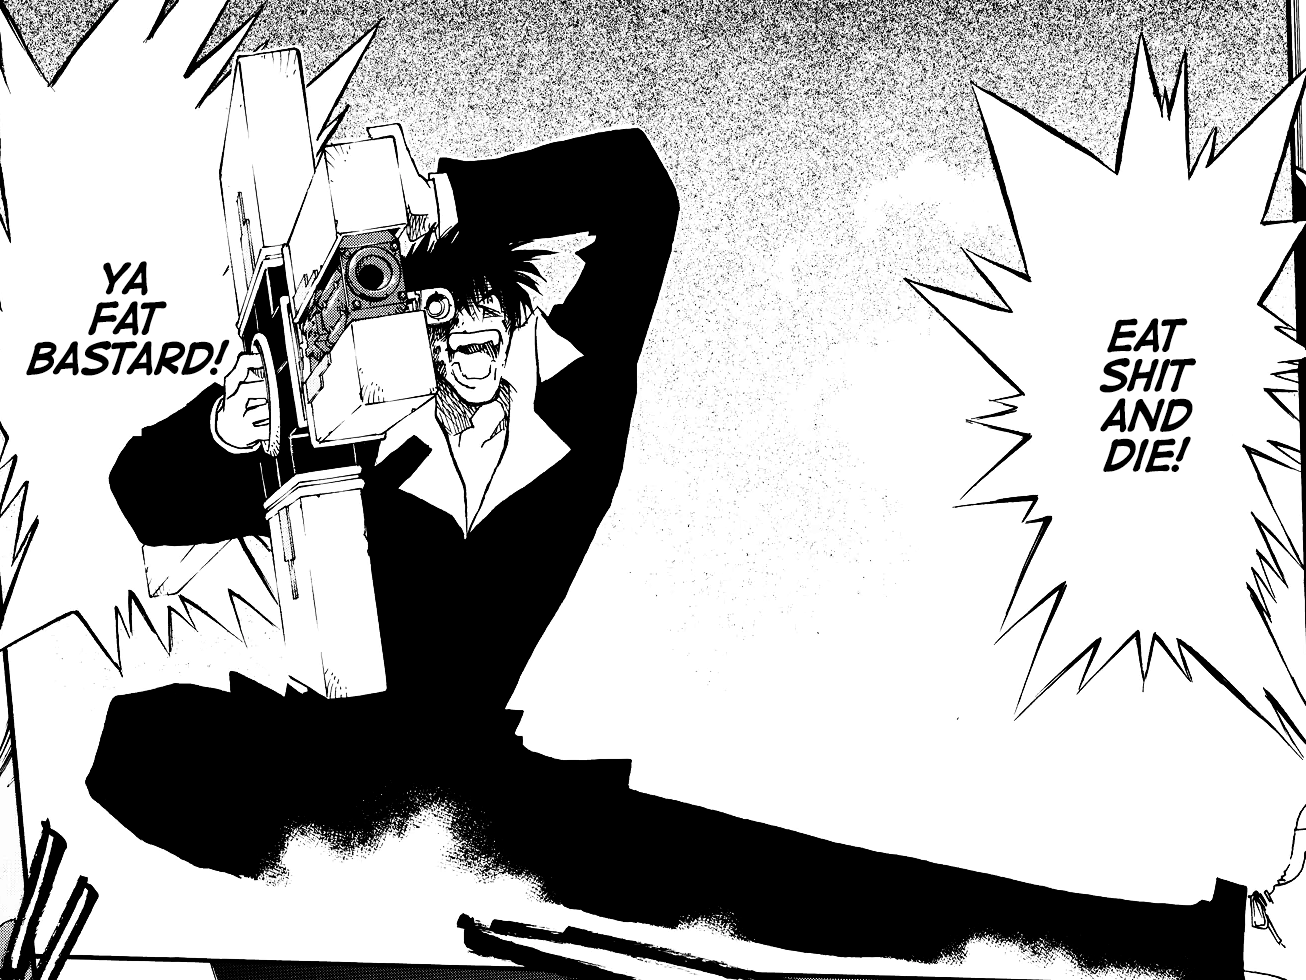 wolfwood pointing the punisher's rocket launcher, yelling ‘Eat shit and die! You fat bastard!’